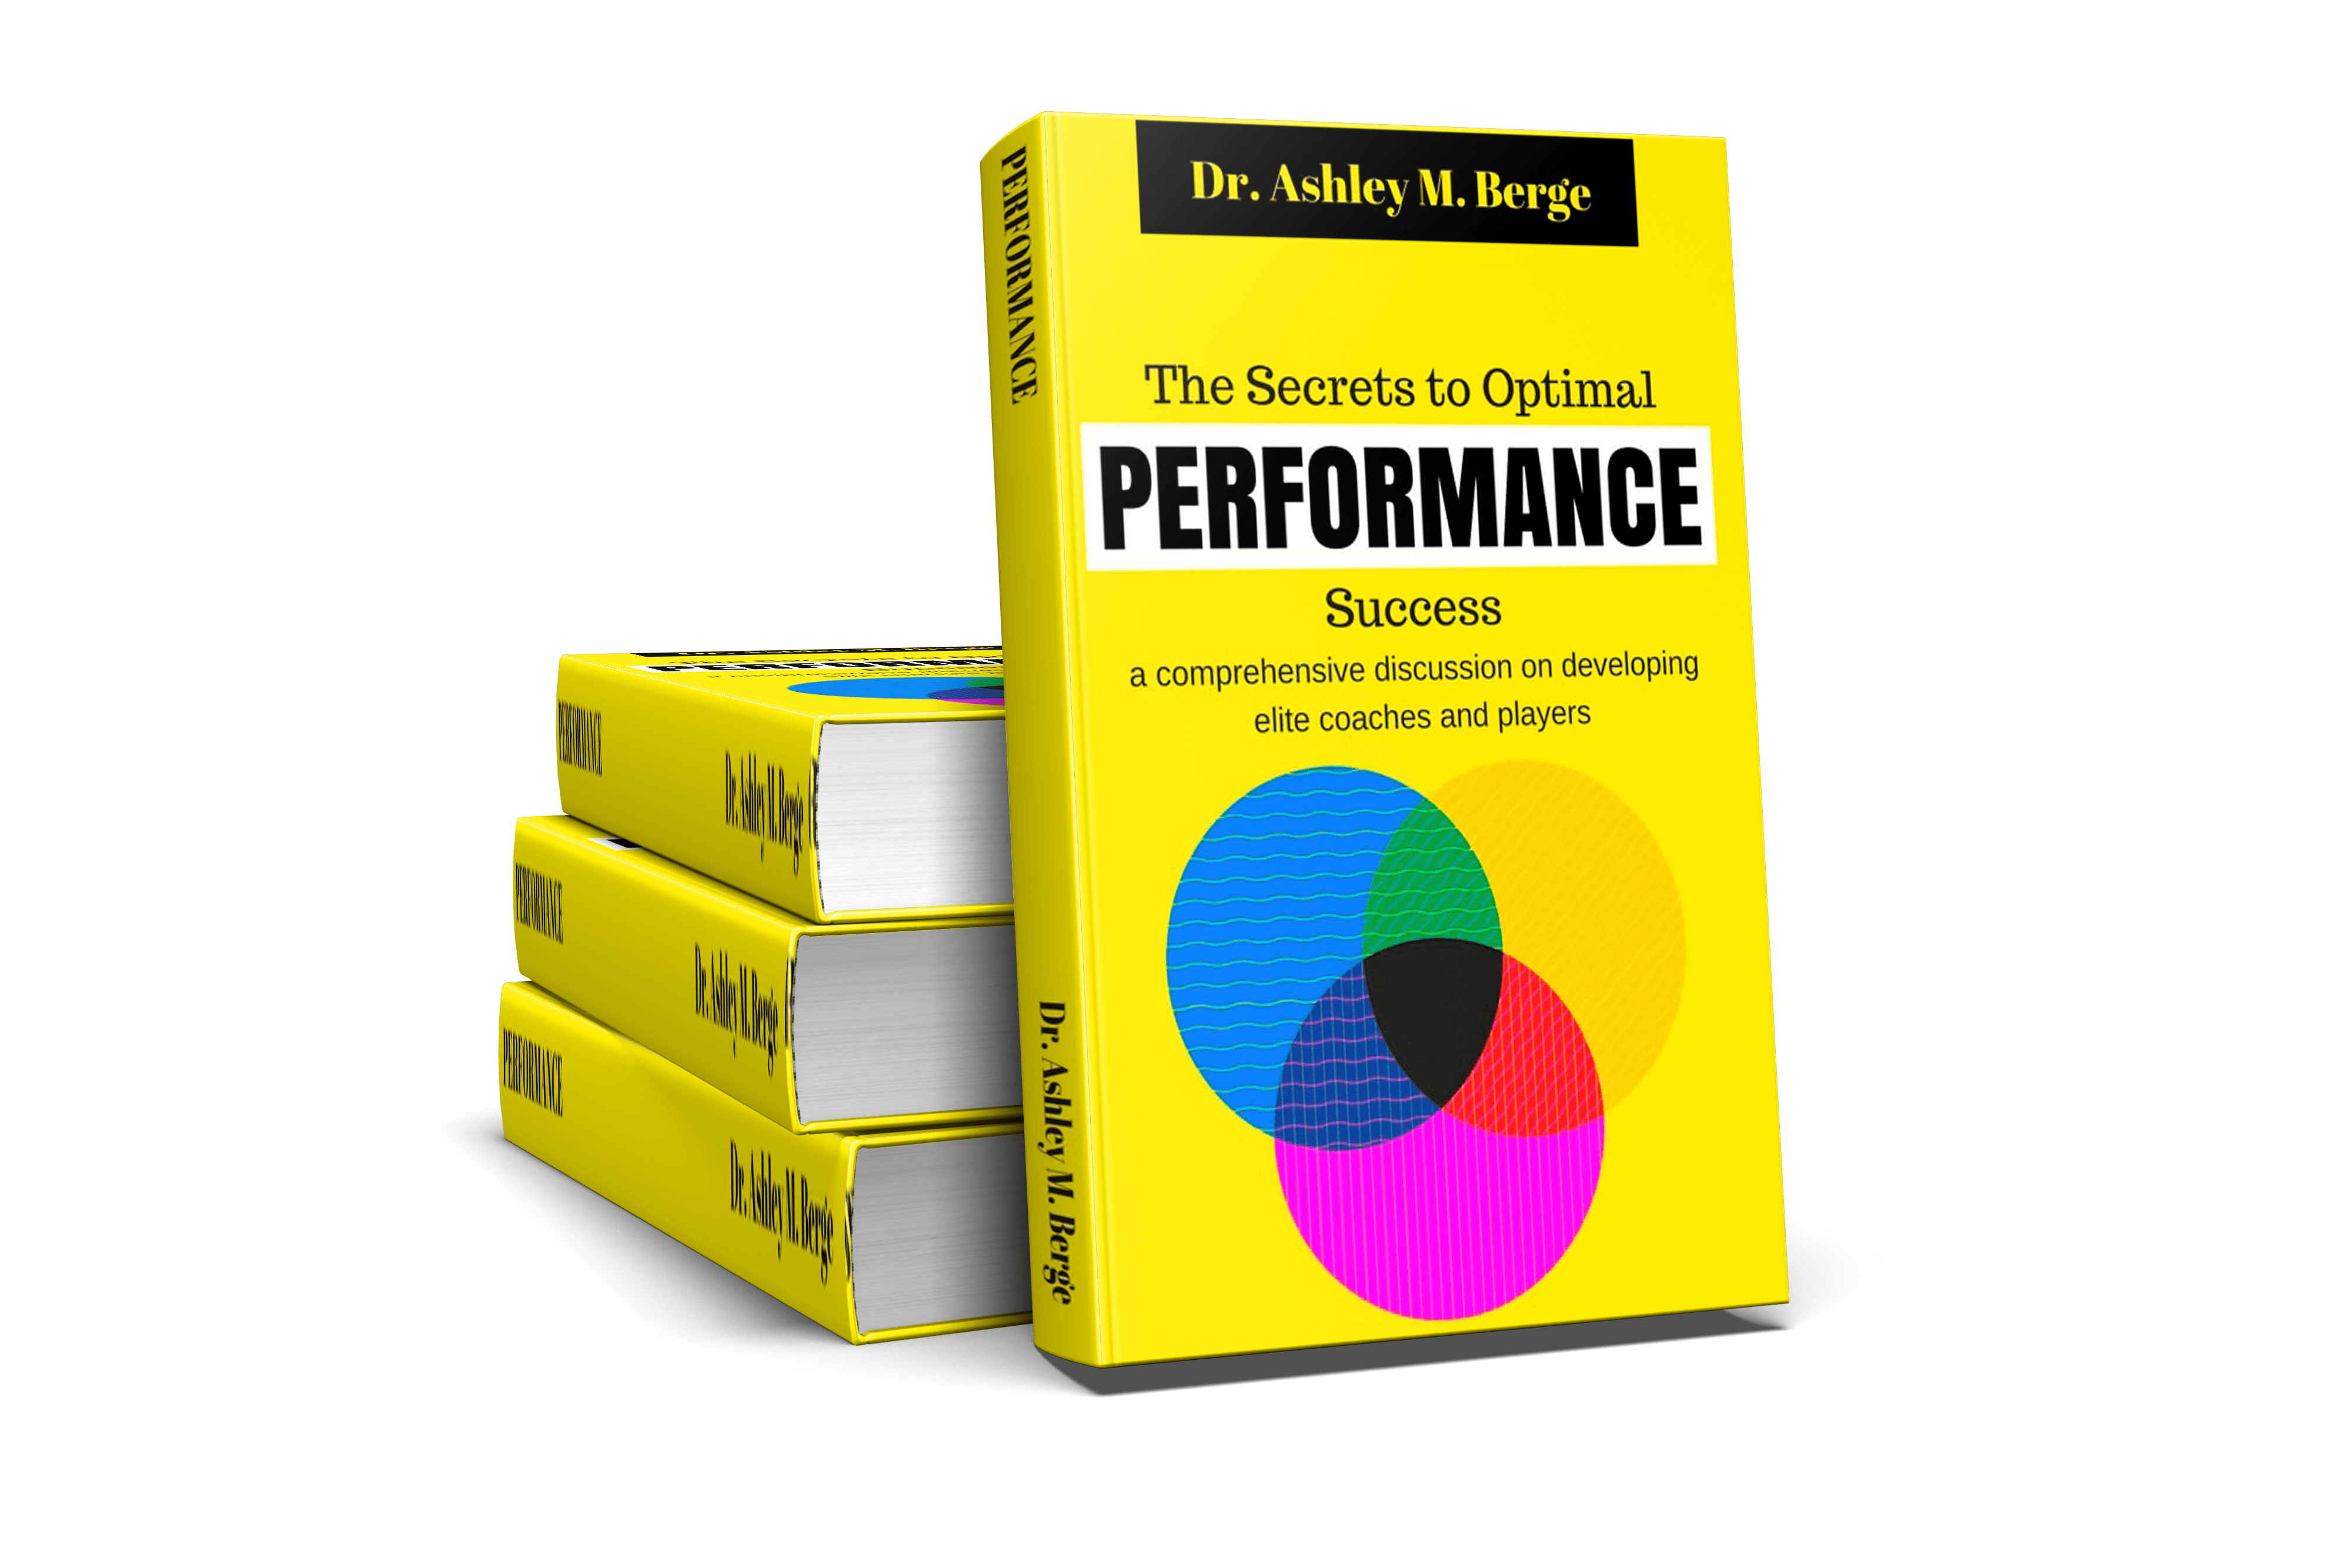 The Secrets to Optimal <a href="https://am8international.com/product/rrp-the-secrets-to-optimal-performance-success-download-only/" data-type="product" data-id="17588" rel="nofollow">Performance Success</a>